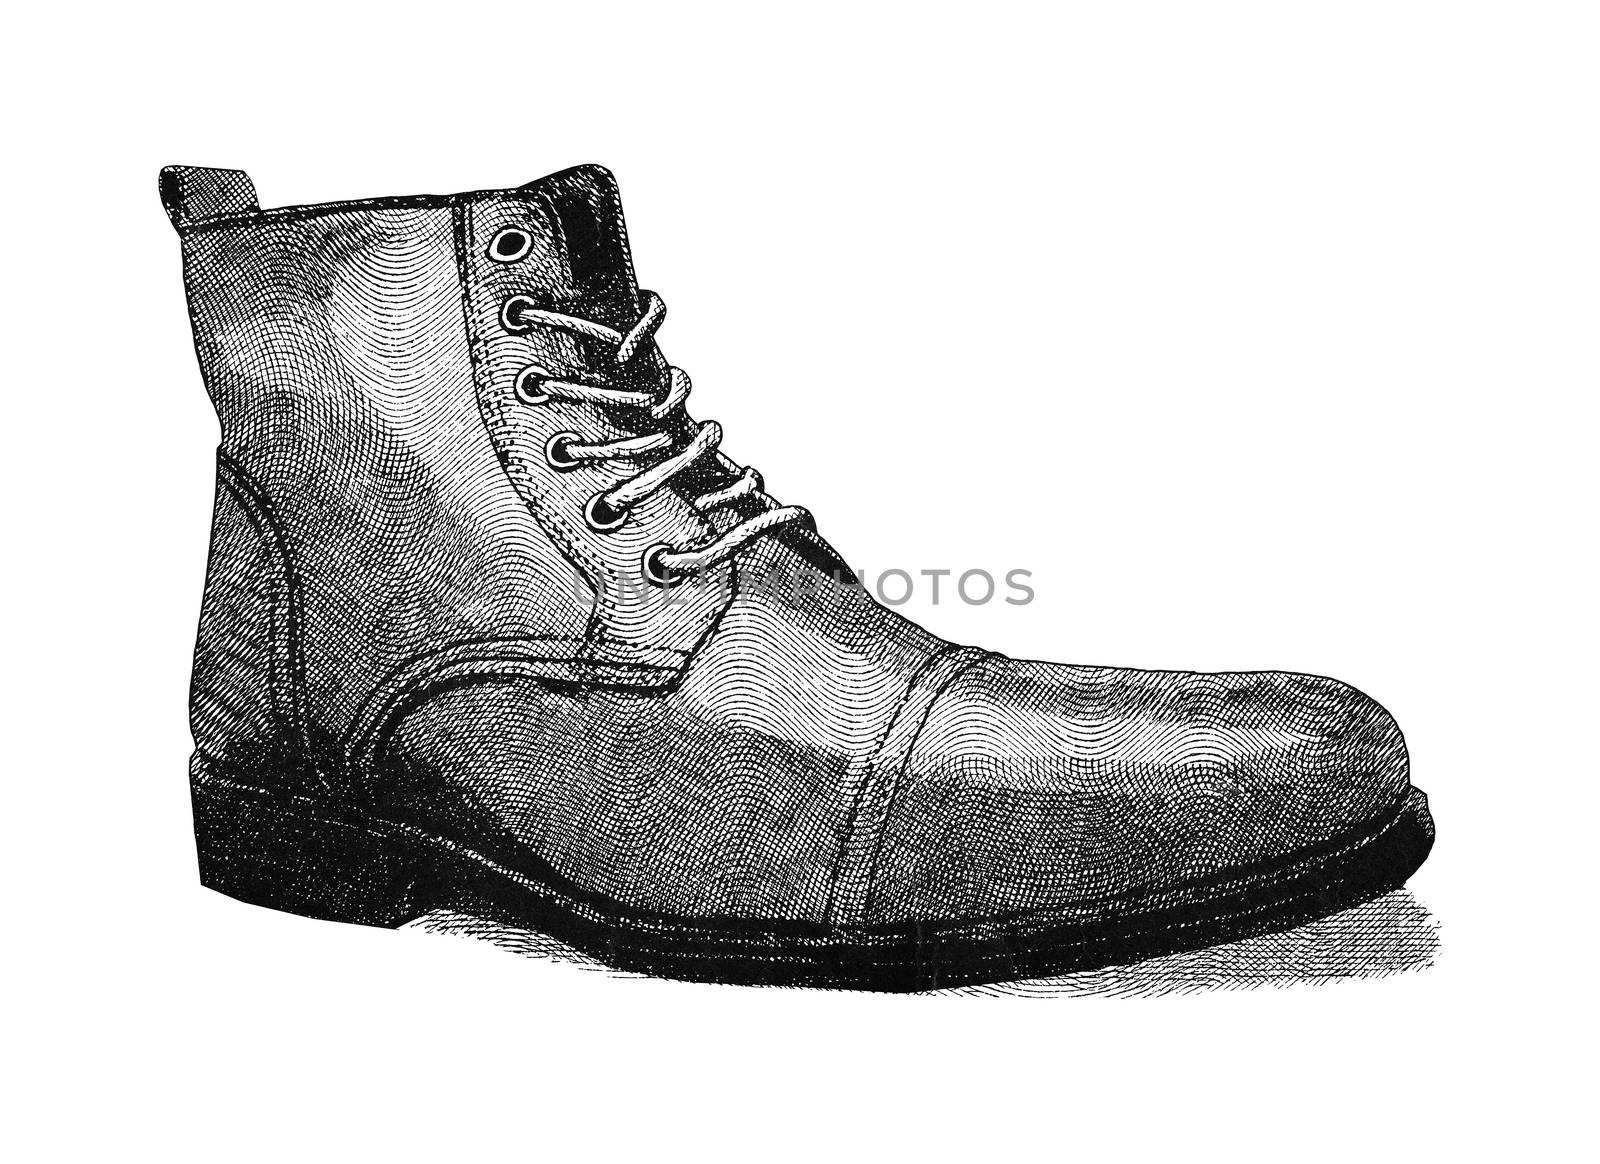 Original digital illustration of a shoe, in style of old engravings.